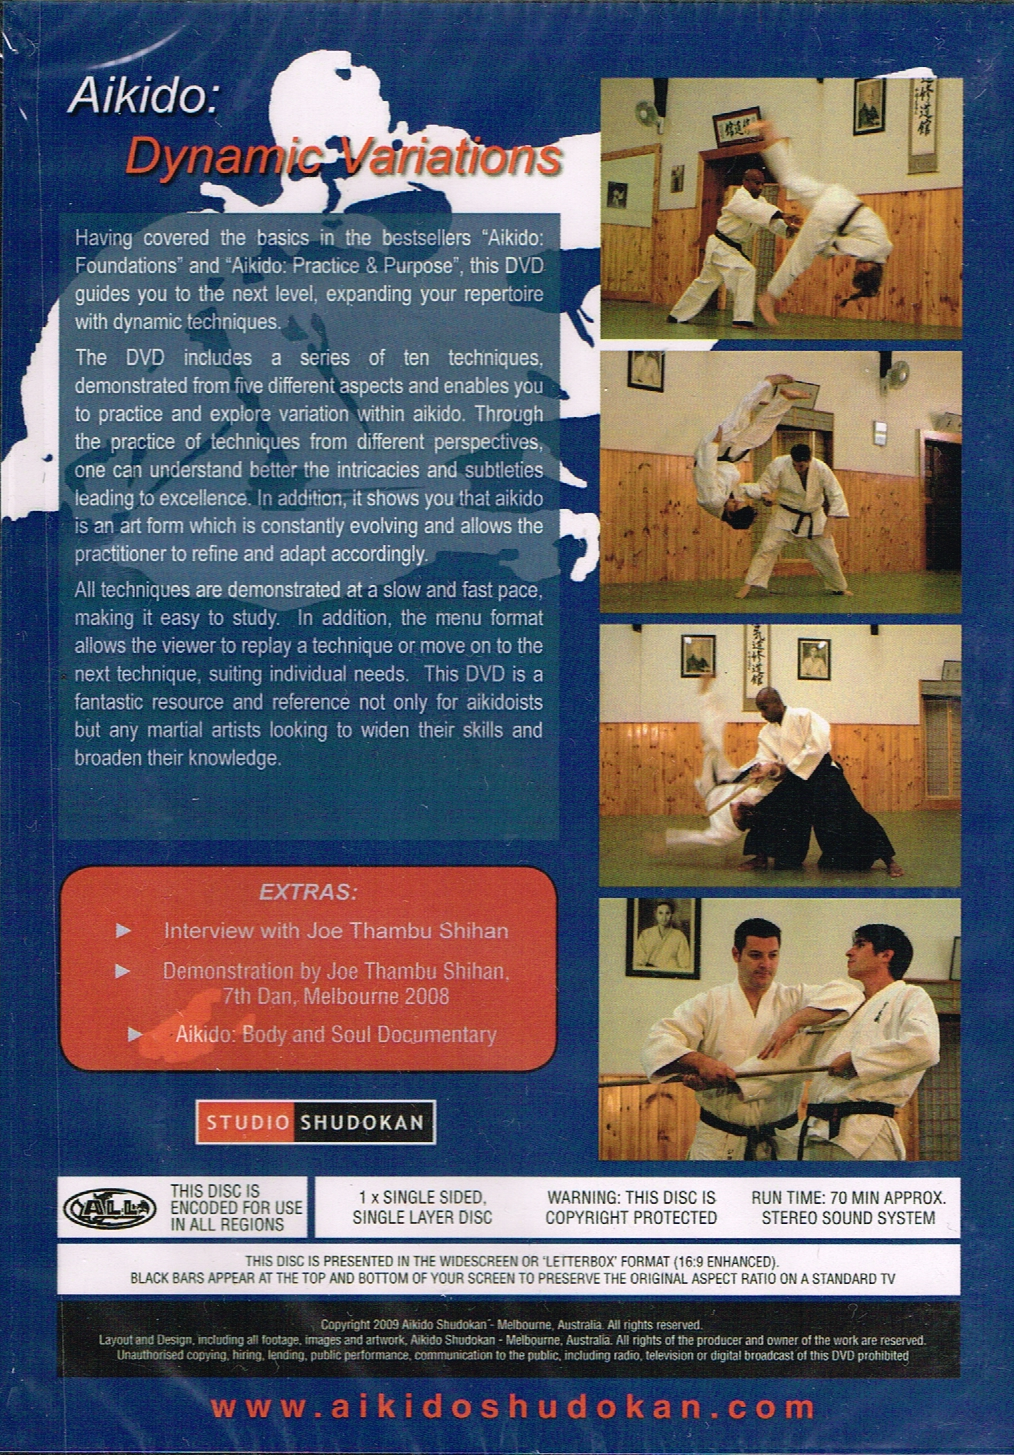 AIKIDO: DYNAMIC VARIATIONS